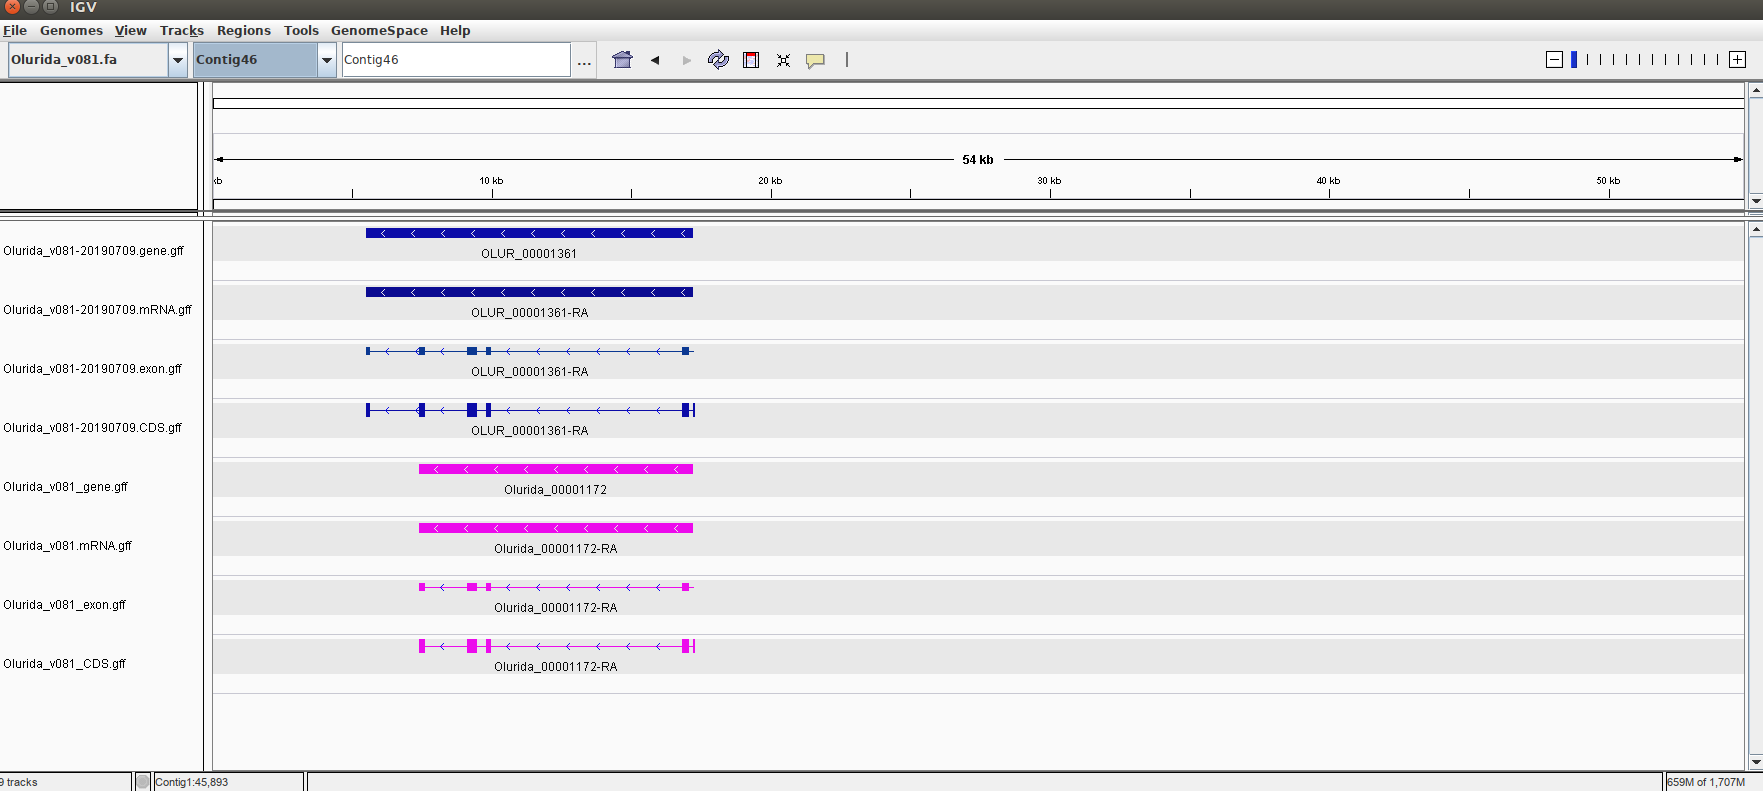 IGV screencap showing differences in gene/CDS annotation